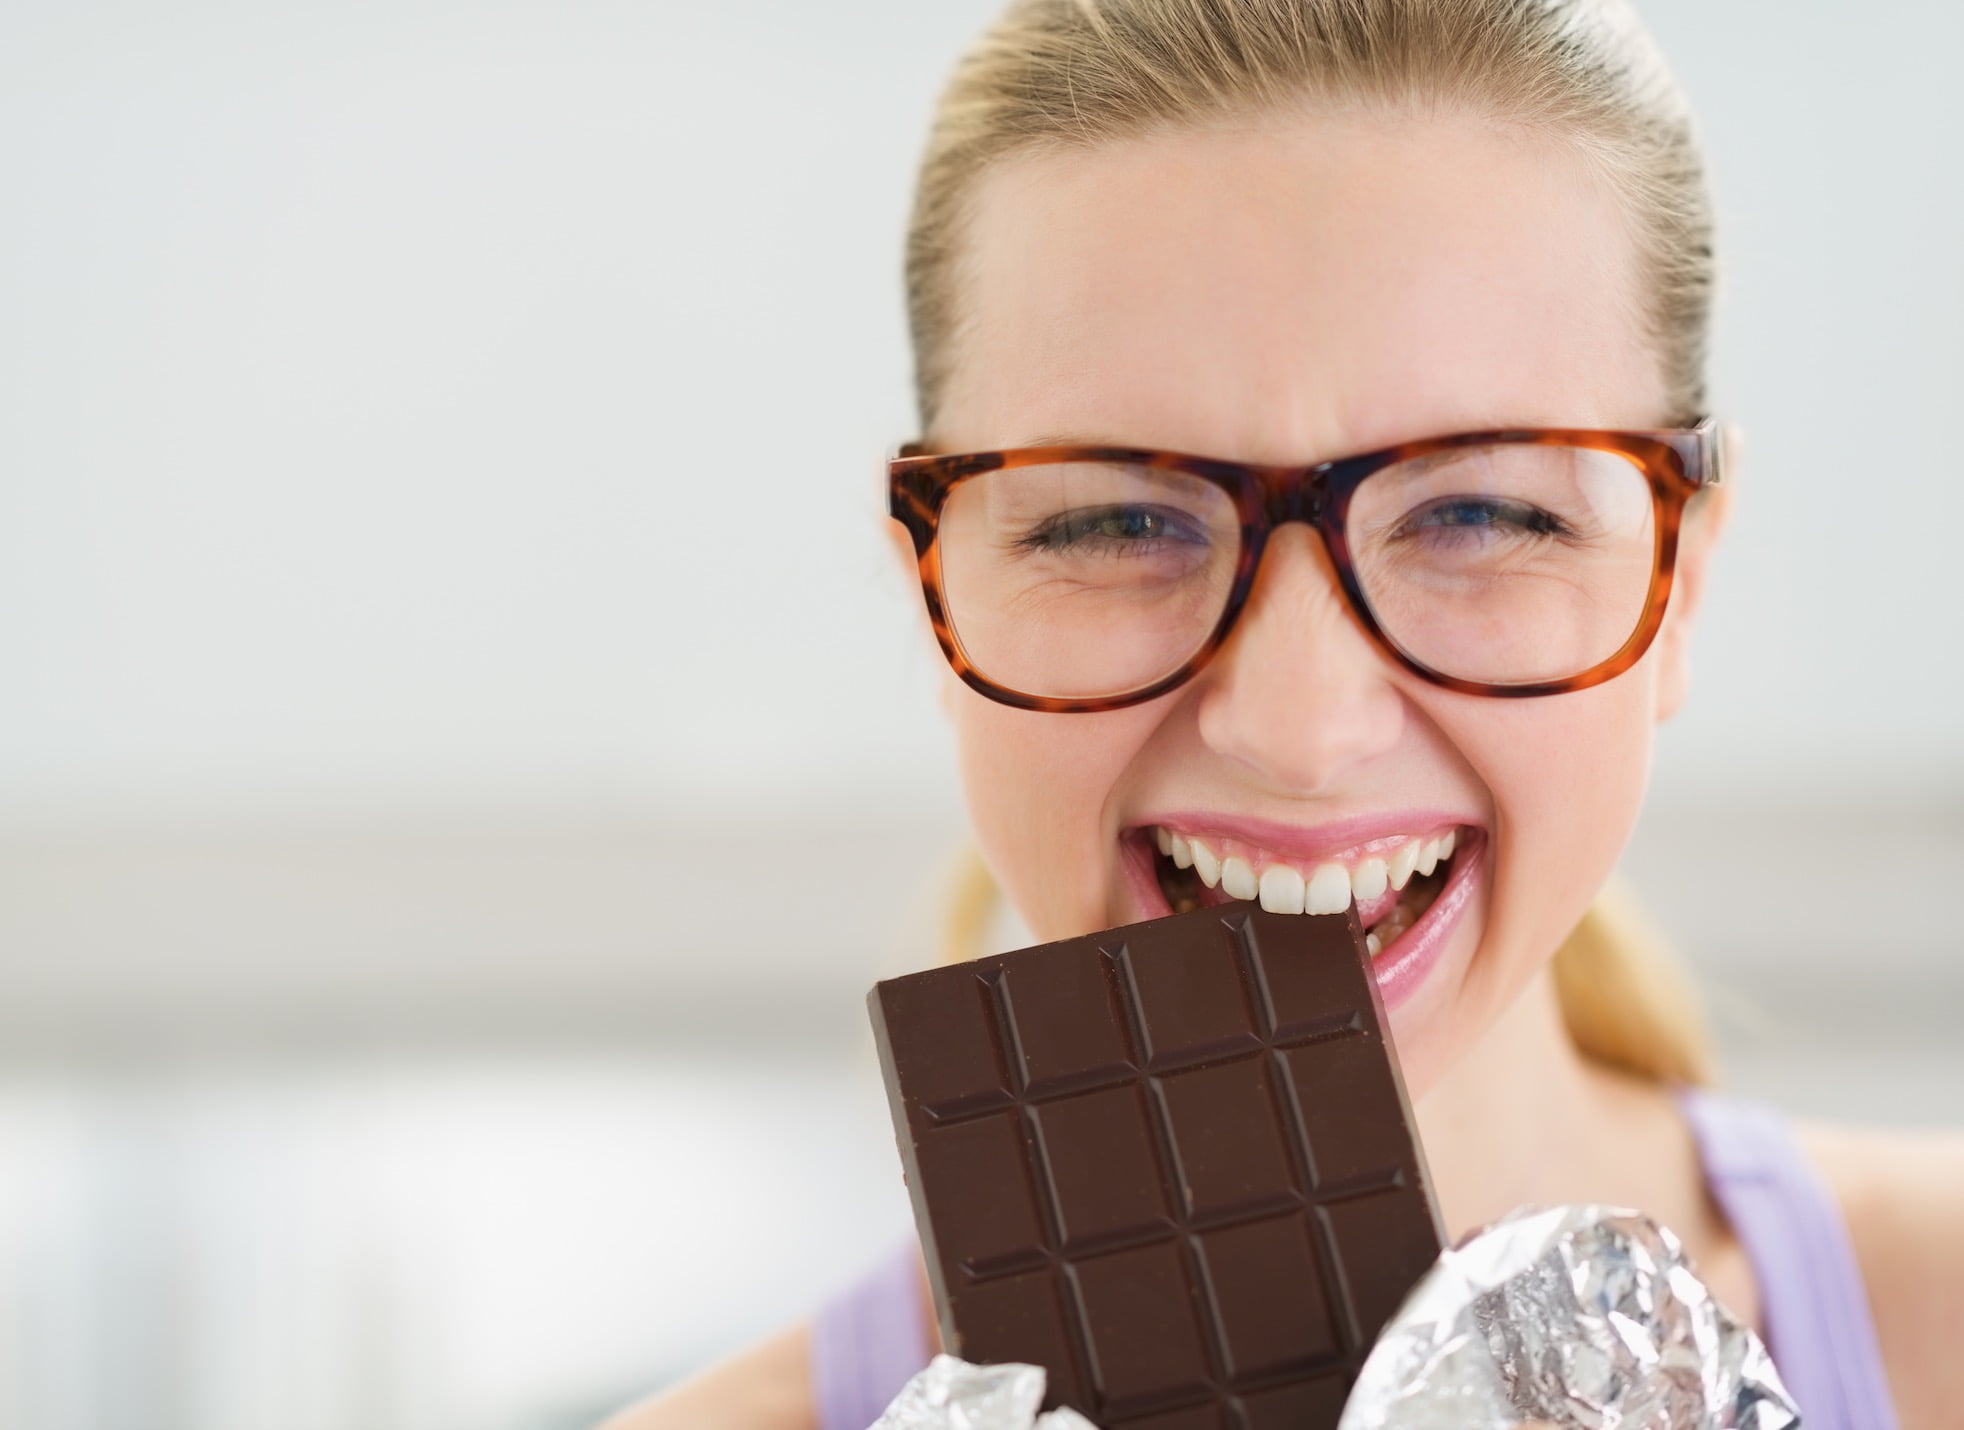 7 Great Ways to Satisfy Your Chocolate Cravings